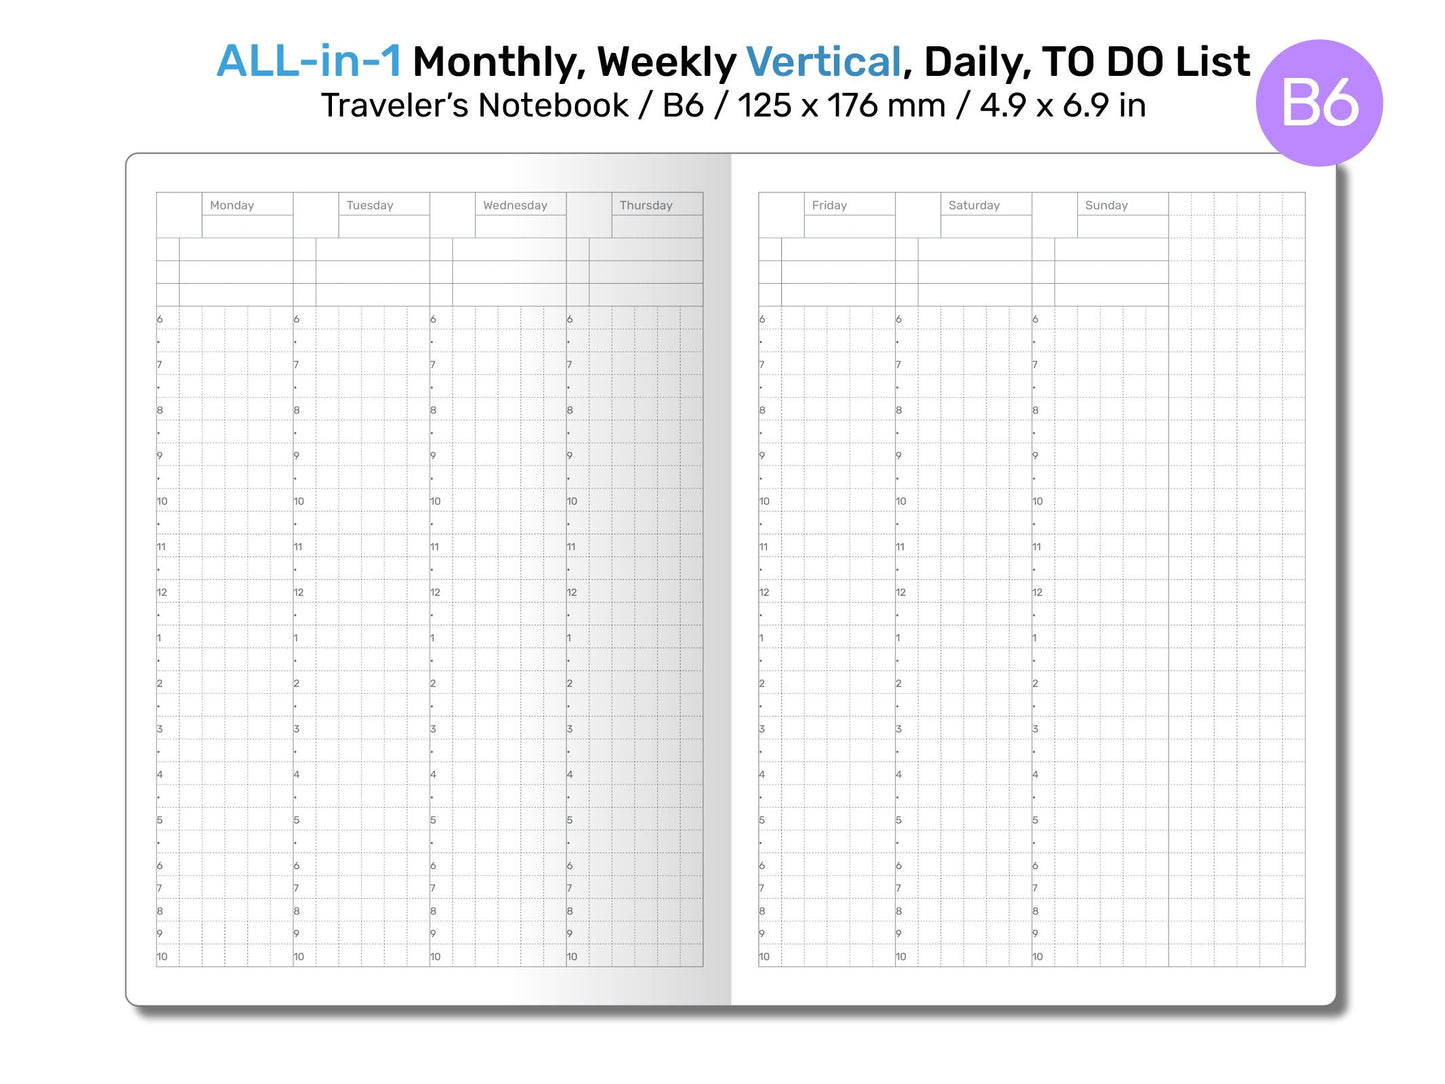 B6 TN All-in-One Monthly, Weekly Vertical, Tracker / TO DO List, Grid Notes Printable Traveler's Notebook Insert